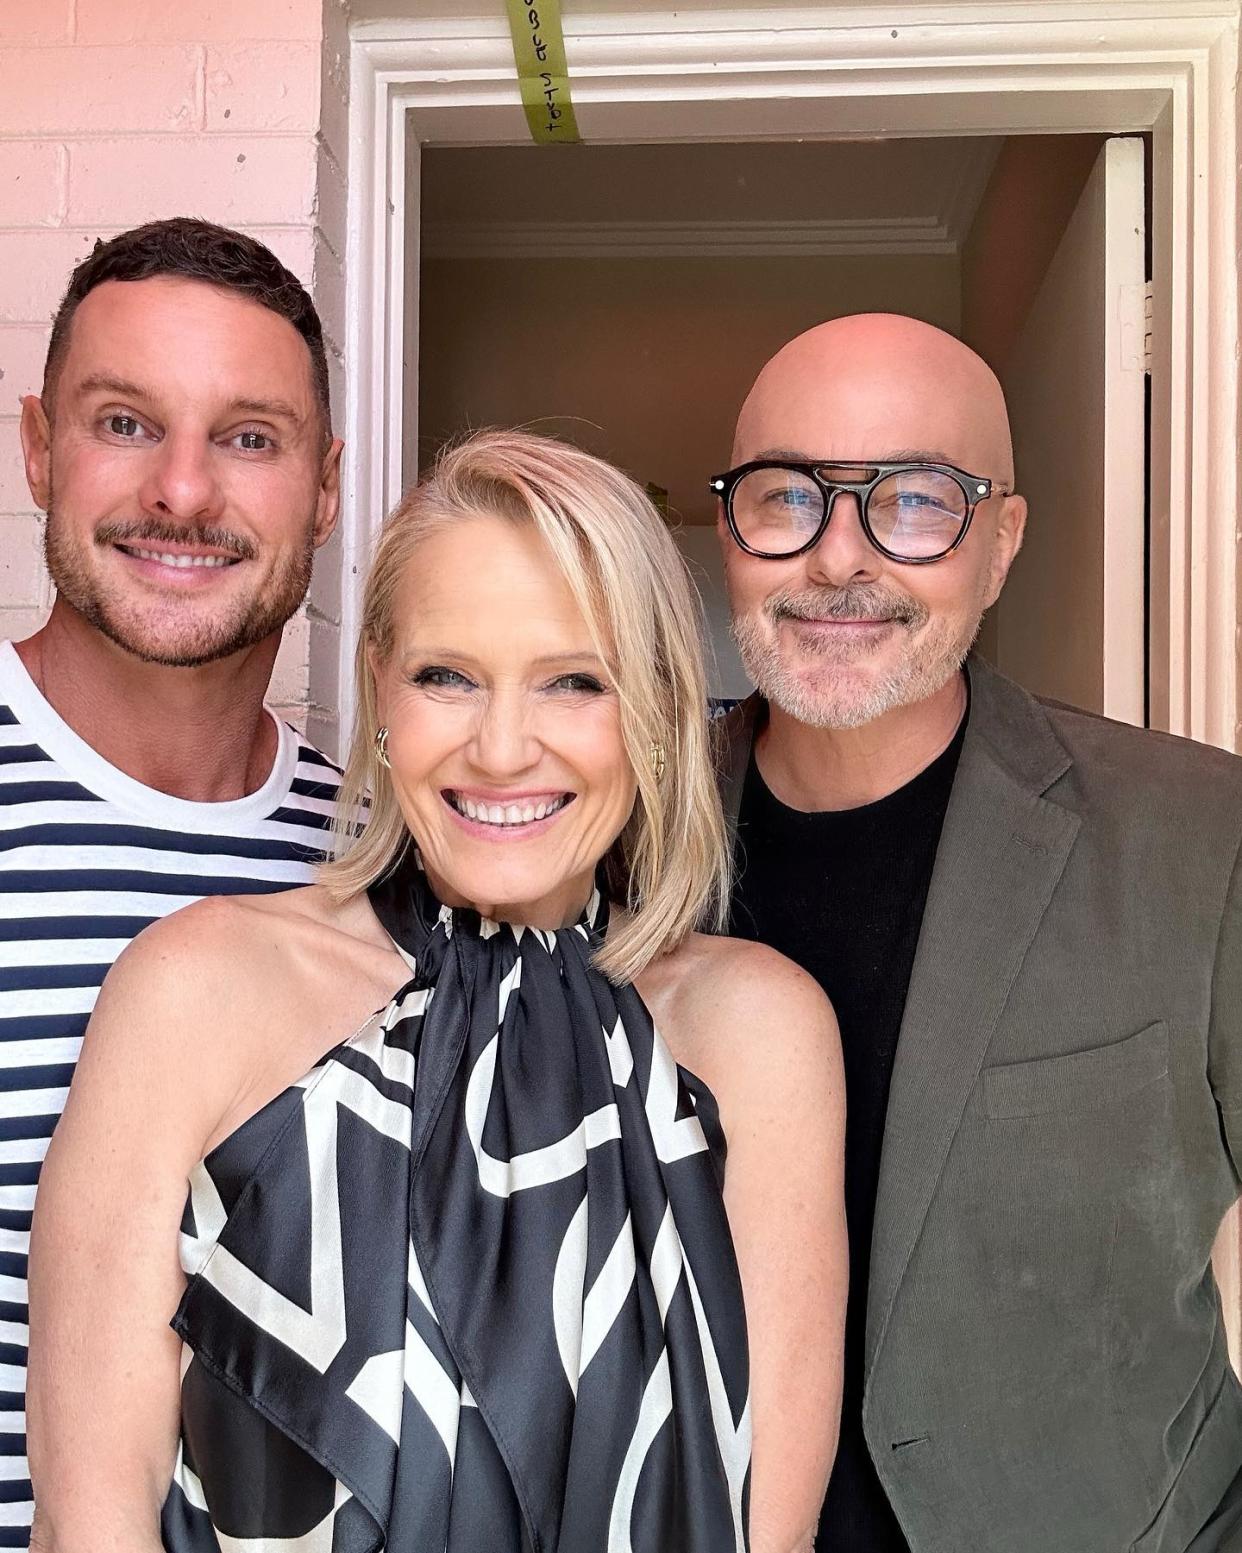 The Block's Neale Whitaker has left fans devastated after revealing he's no longer a judge on the renovation show. Photo: Instagram/nealewhitaker